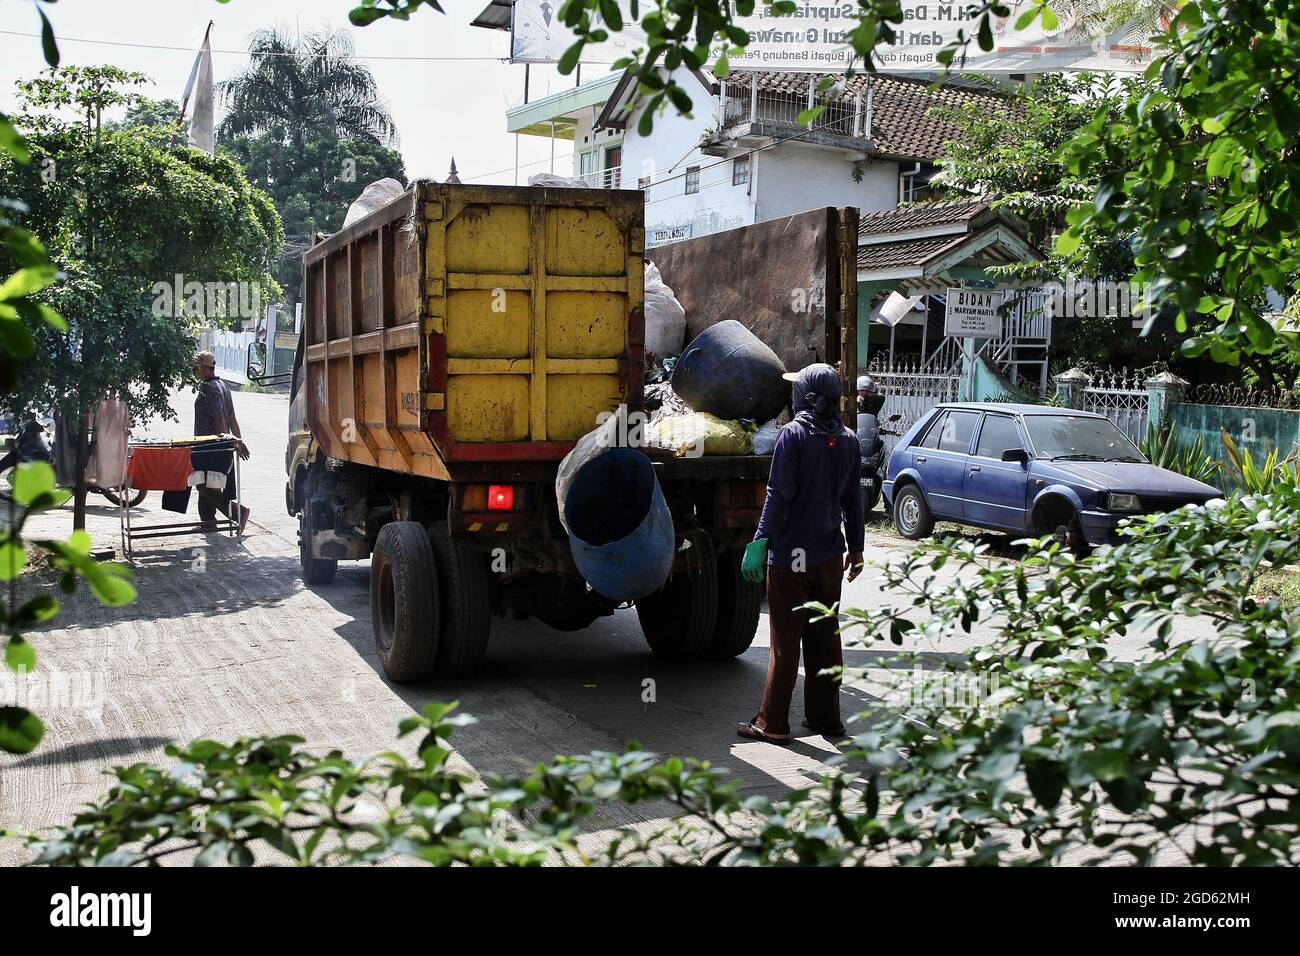 Bandung, West Java, Indonesia. A garbage man is near a garbage truck Stock Photo